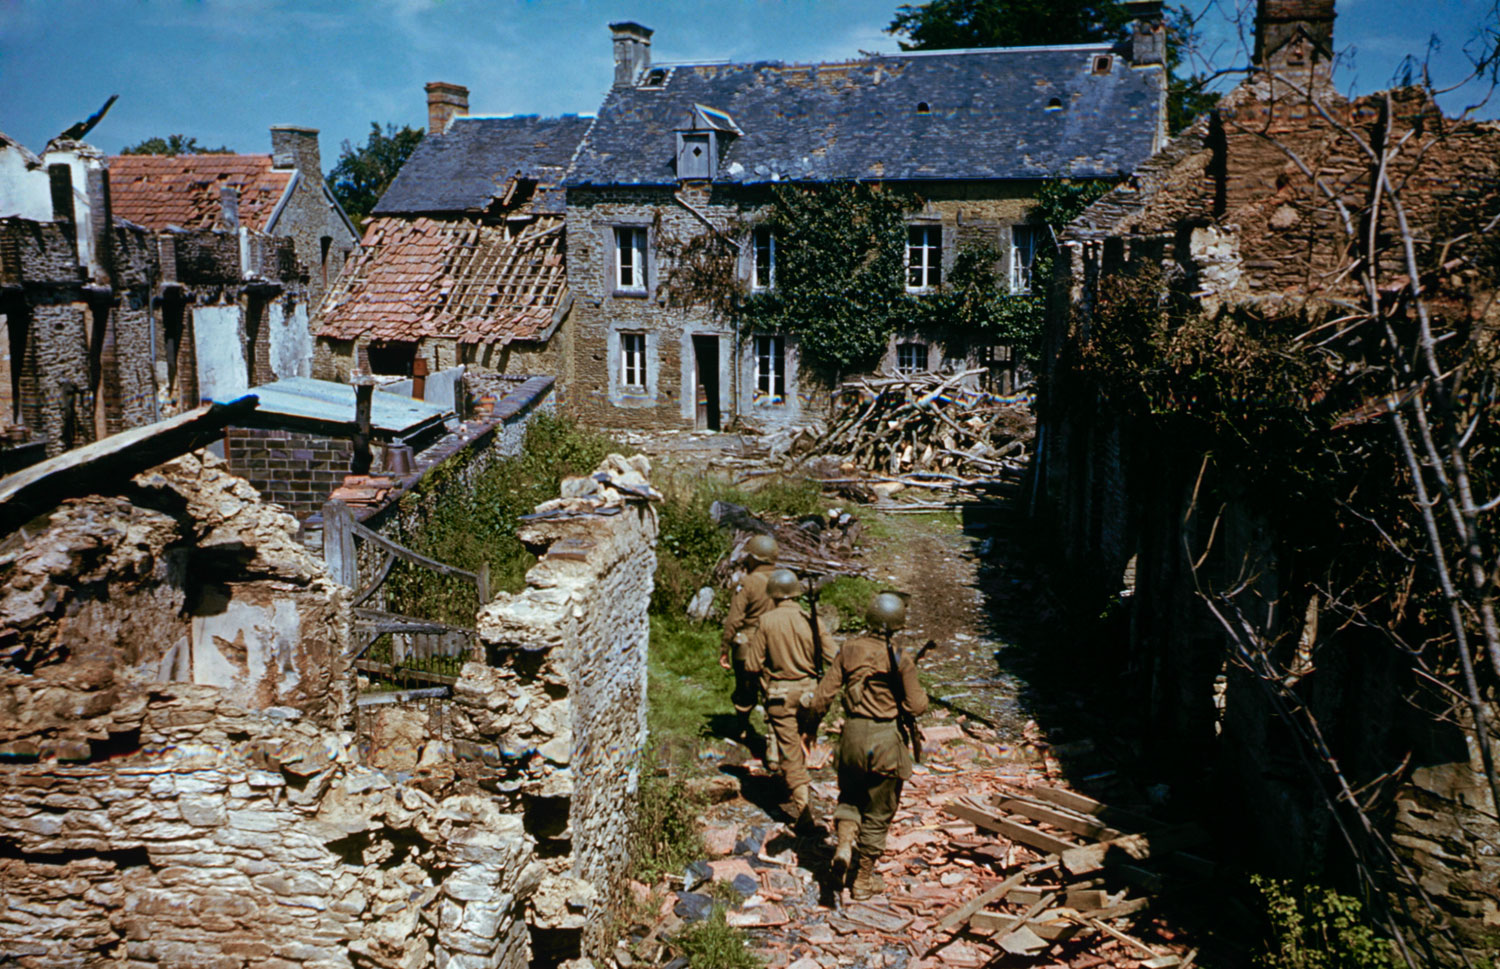 We thought it was going to be murder but it wasn't. To show you how easy it was, I ate my bar of chocolate. In every other operational trip, I sweated so much the chocolate they gave us melted in my breast pocket.  — Frank Scherschel describing his experiences photographing the Normandy invasion from the air, before he joined Allied troops heading inland. Above: GIs search ruined homes in western France after D-Day.